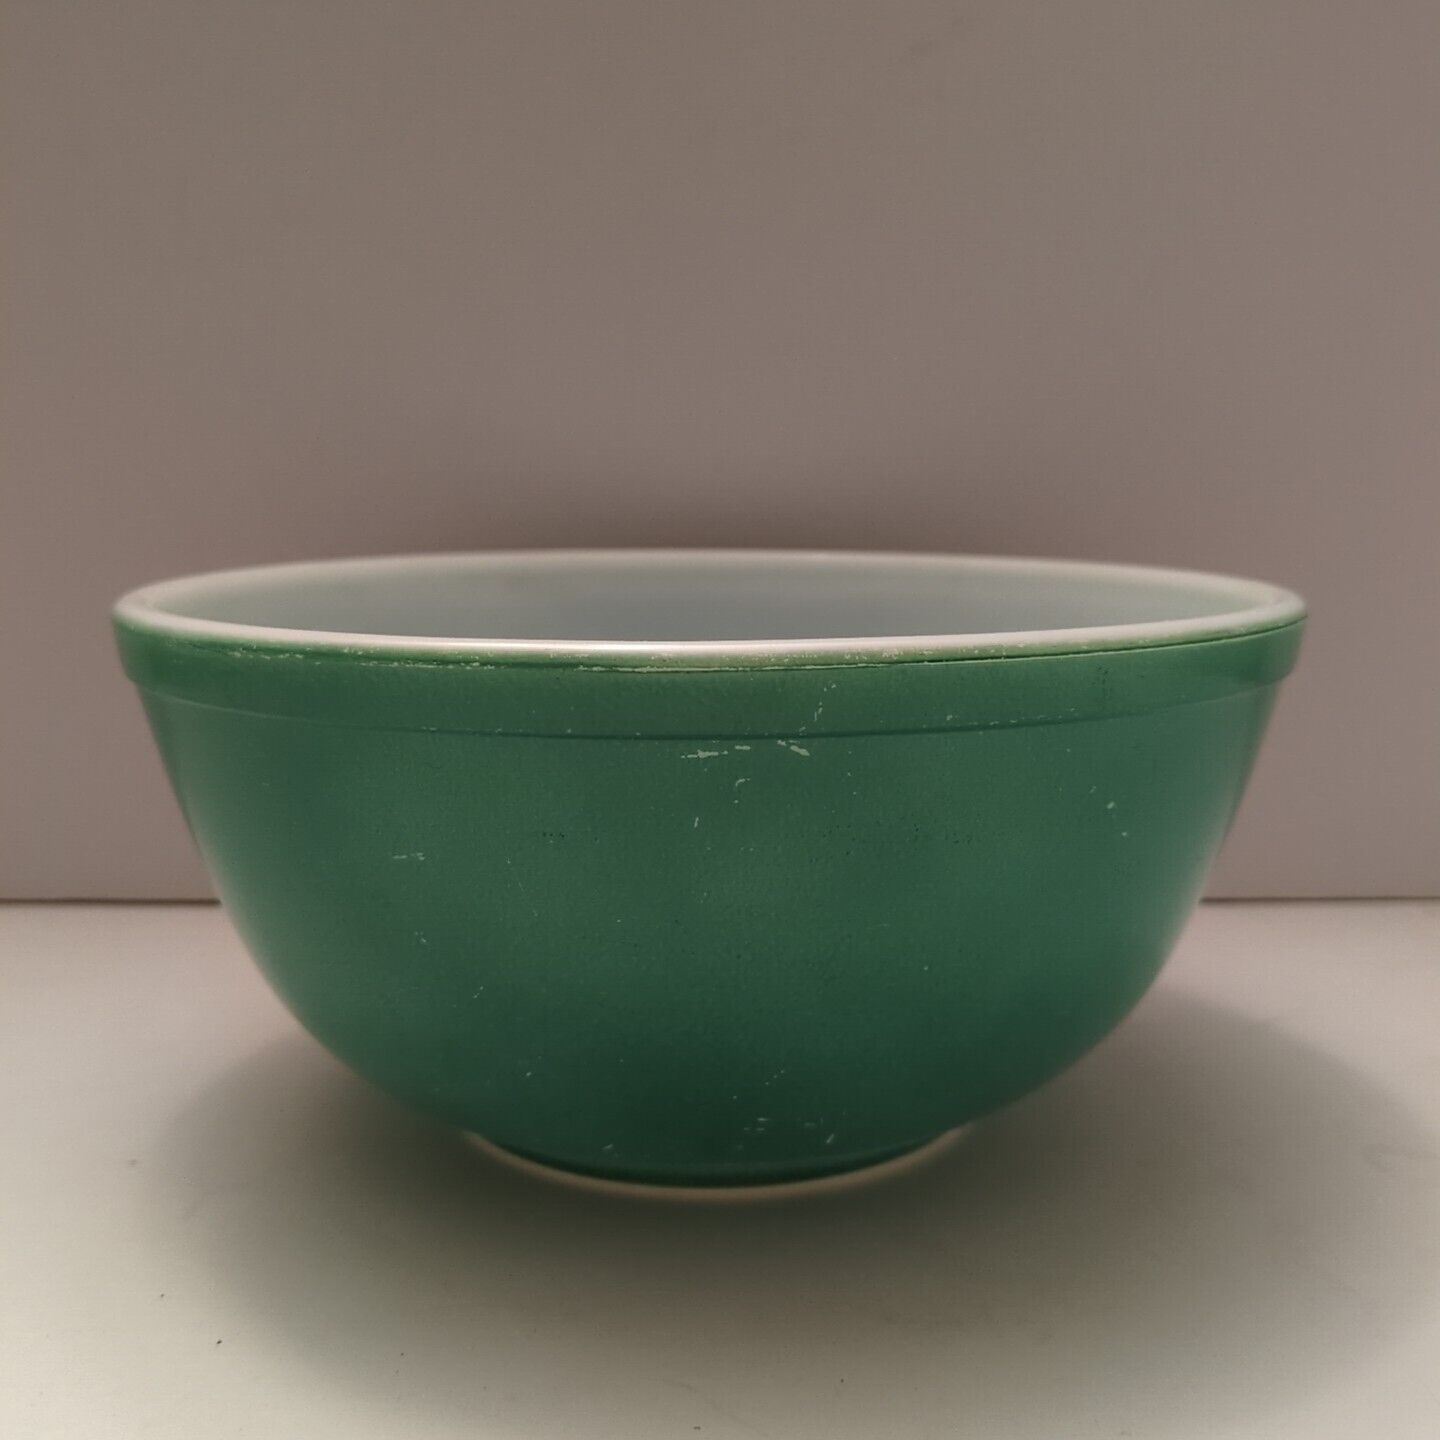 PYREX 403 Primary Green 2.5 QT Mixing Bowl Nesting Vintage See Pics Fo Condition